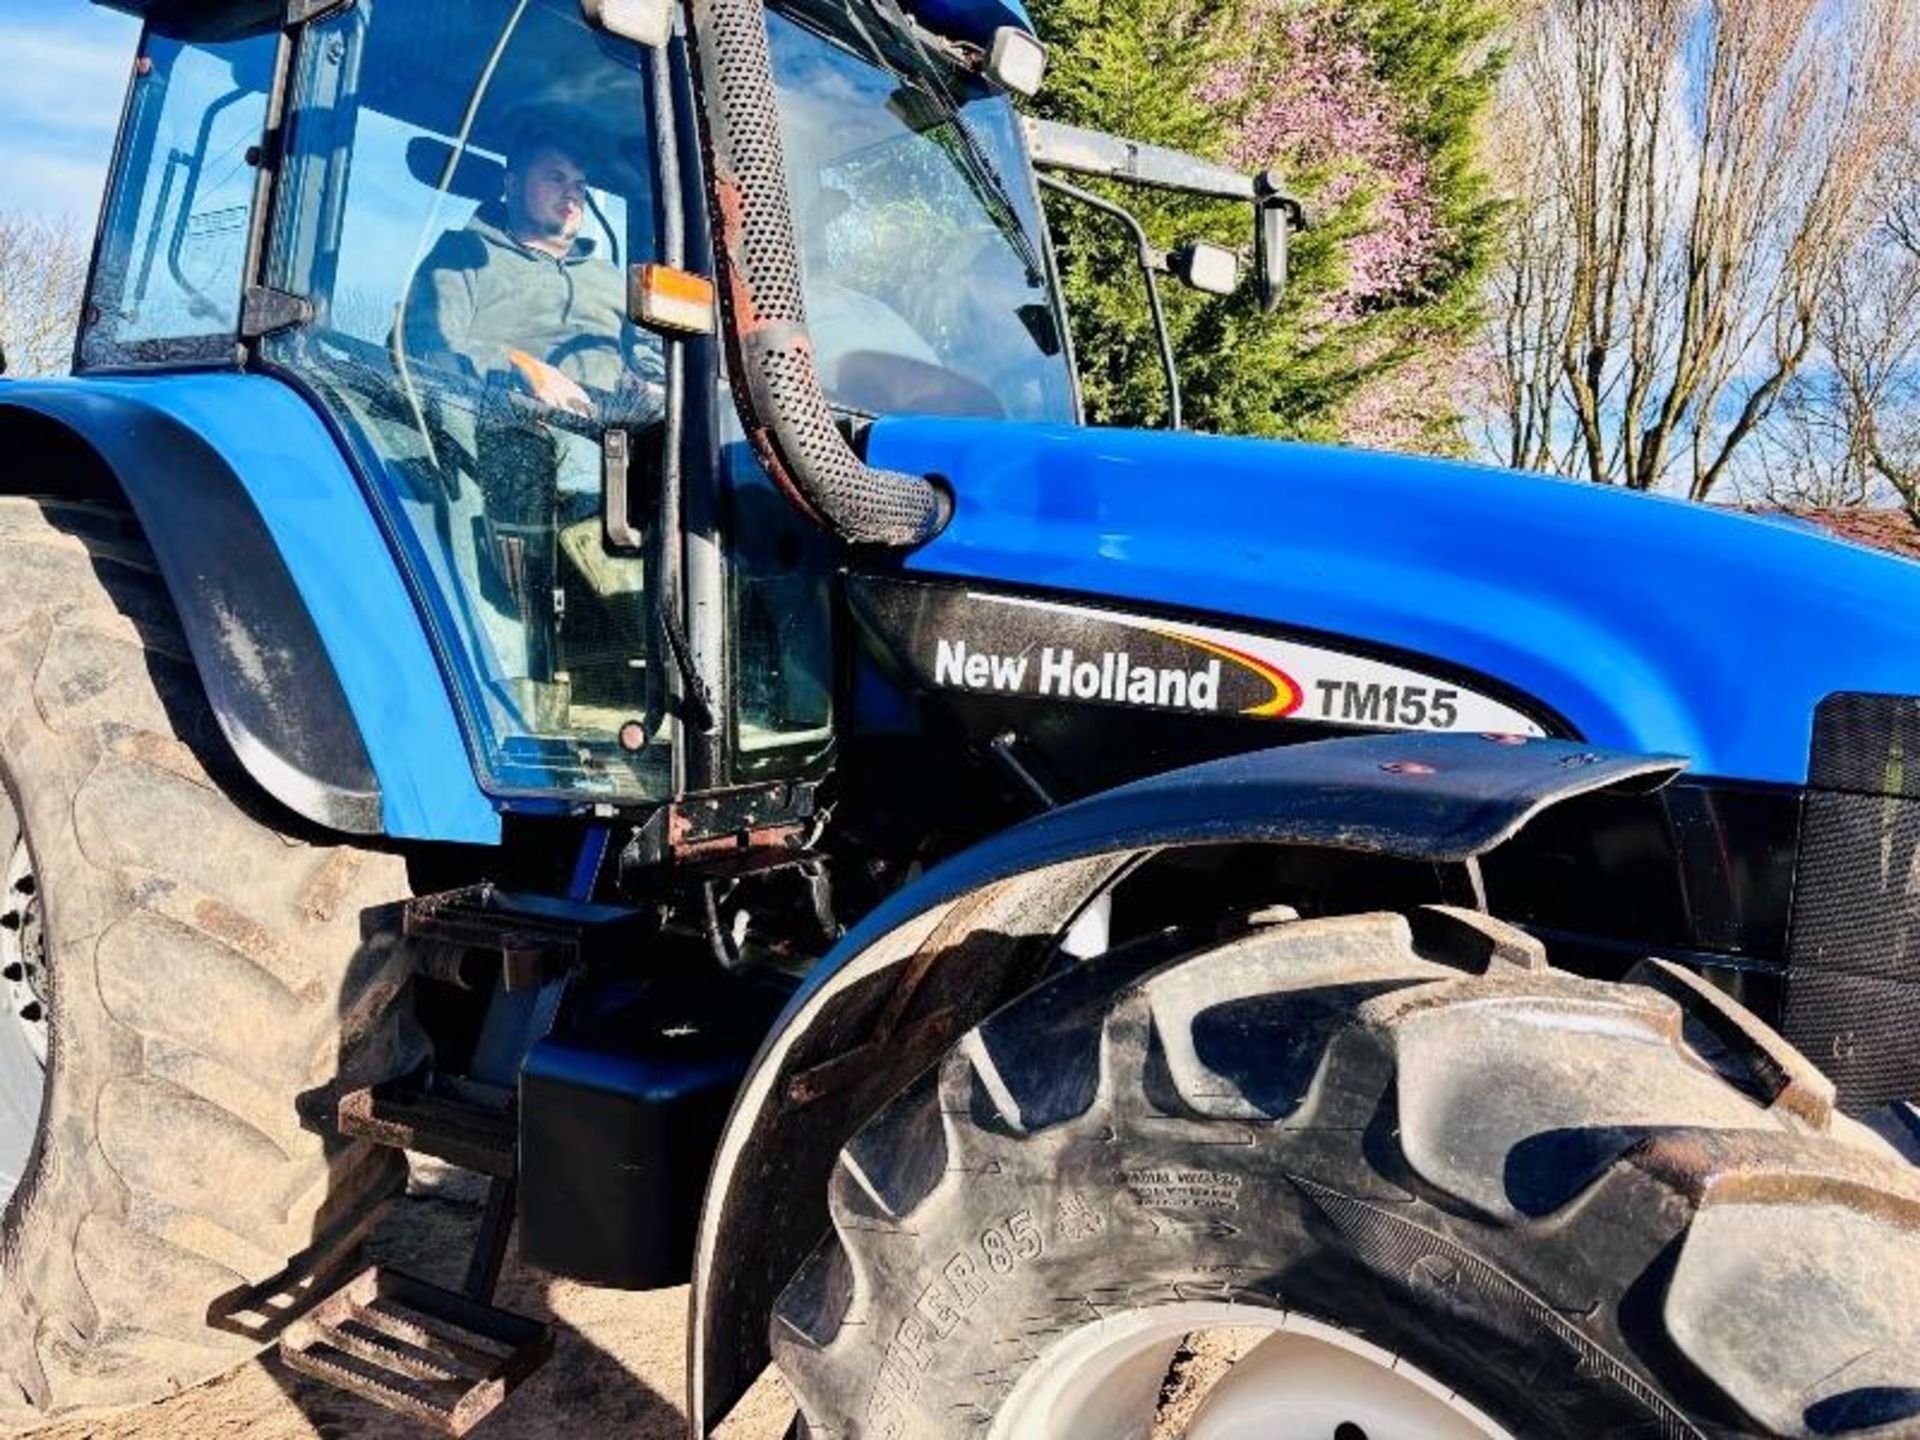 NEW HOLLAND TM155 4WD TRACTOR *5619 HOURS* C/W RANGE COMMAND GEAR BOX - Image 5 of 19